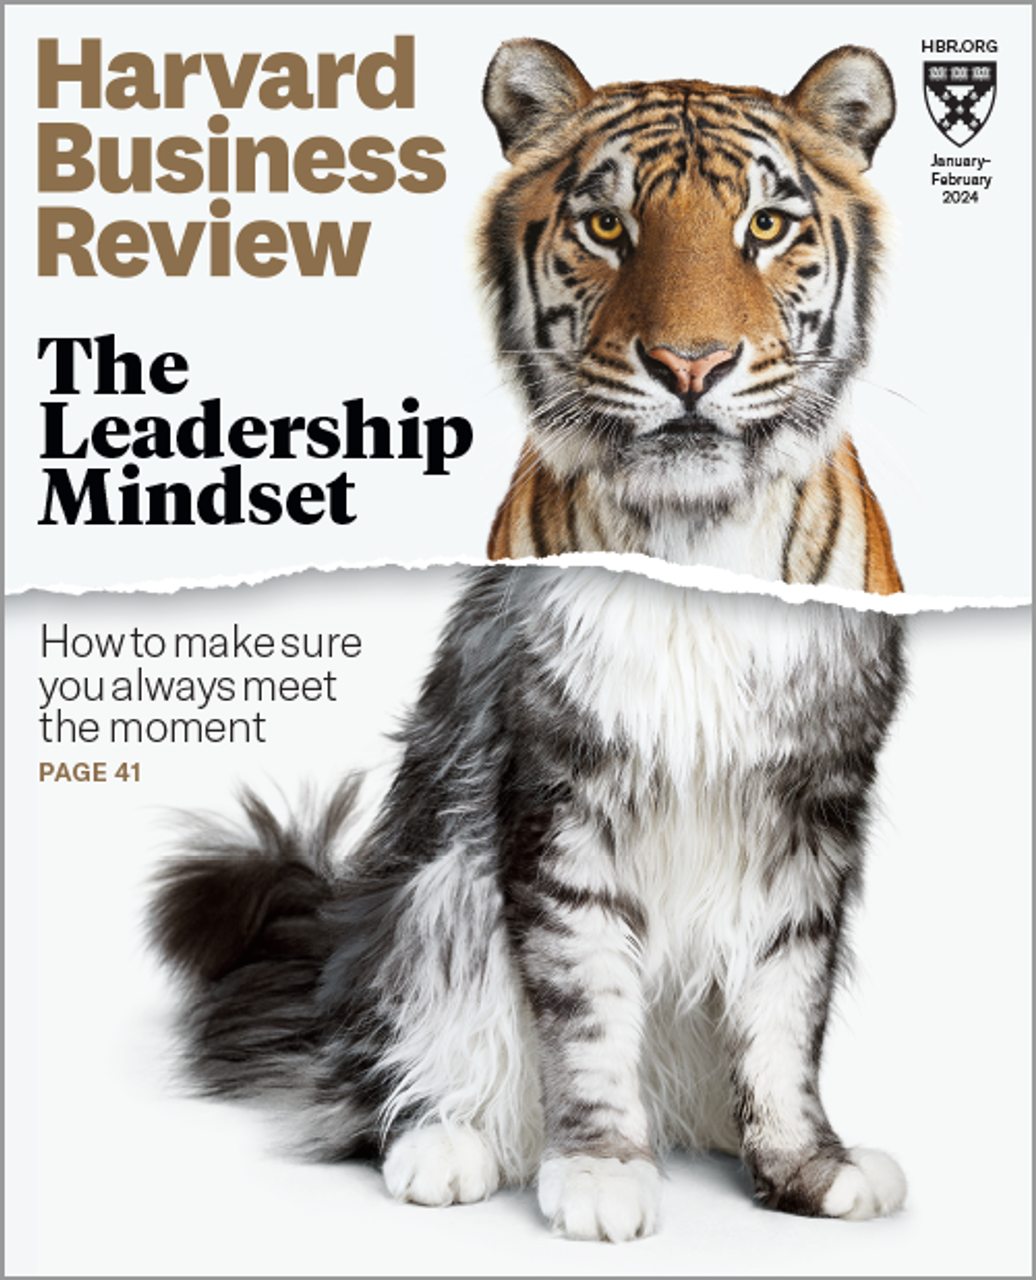 Harvard Business Review, January/February 2024 Issues Magazine Shop